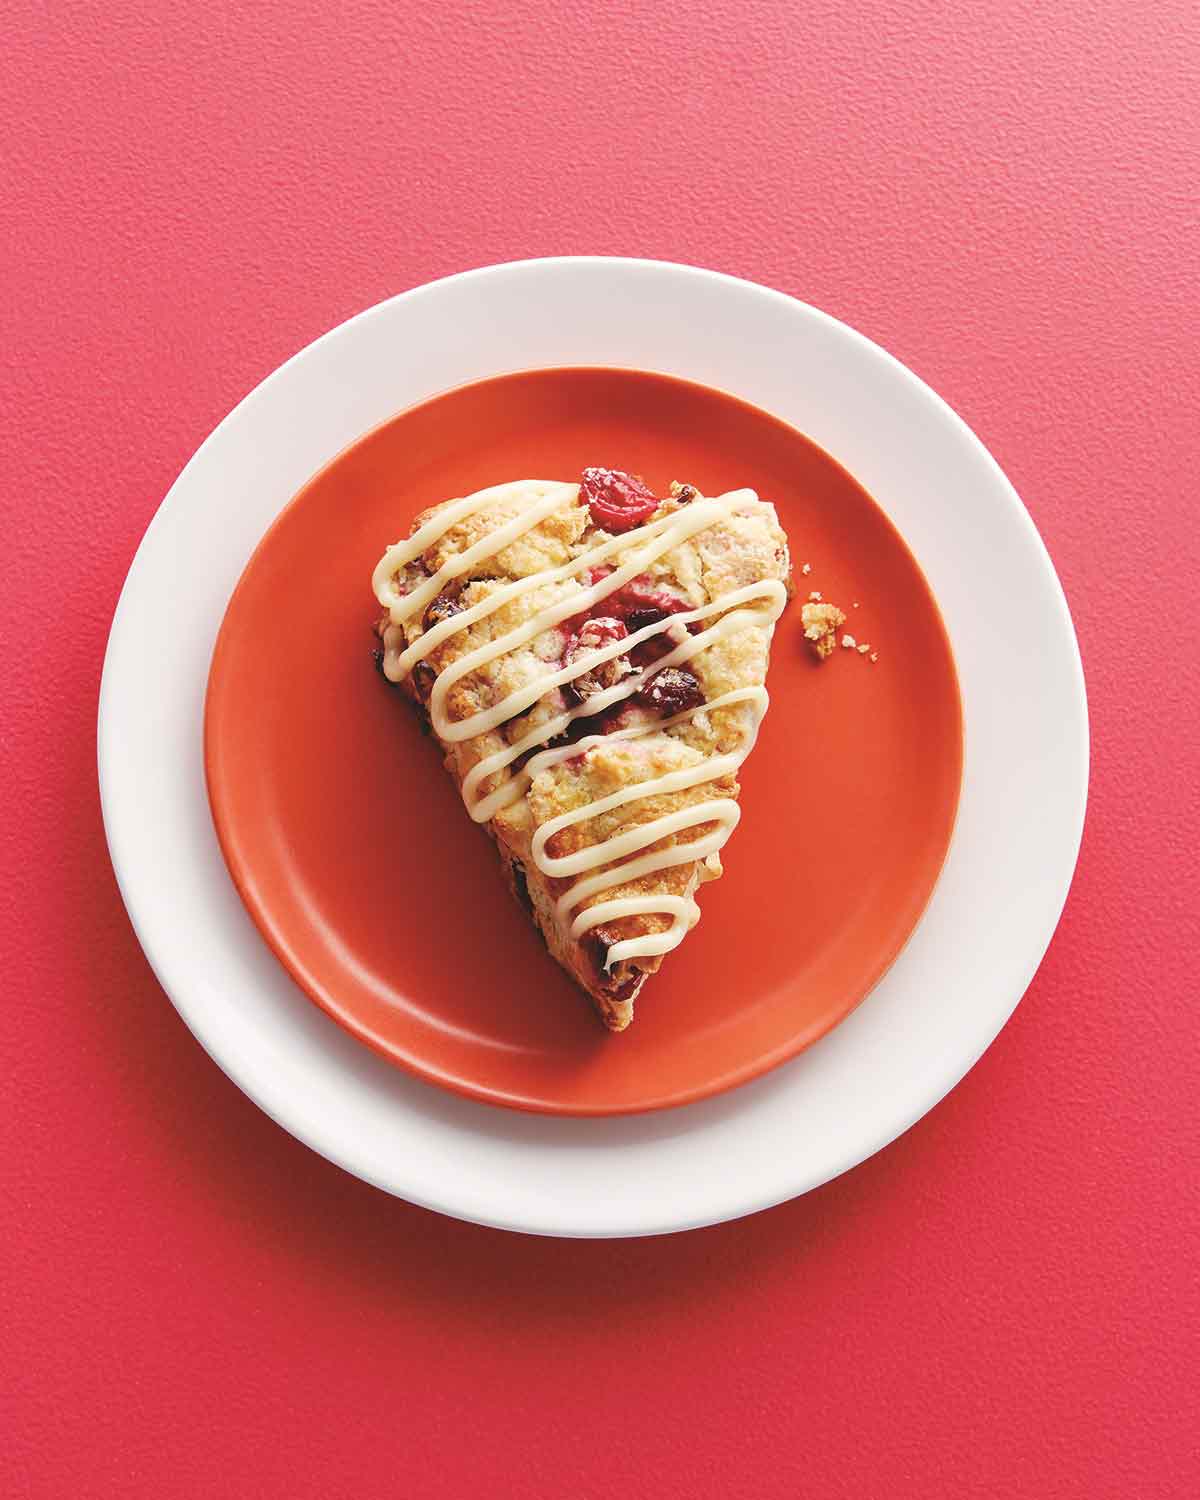 A cranberry scone with white chocolate drizzle on a red plate, which is set on a white plate on a red background.